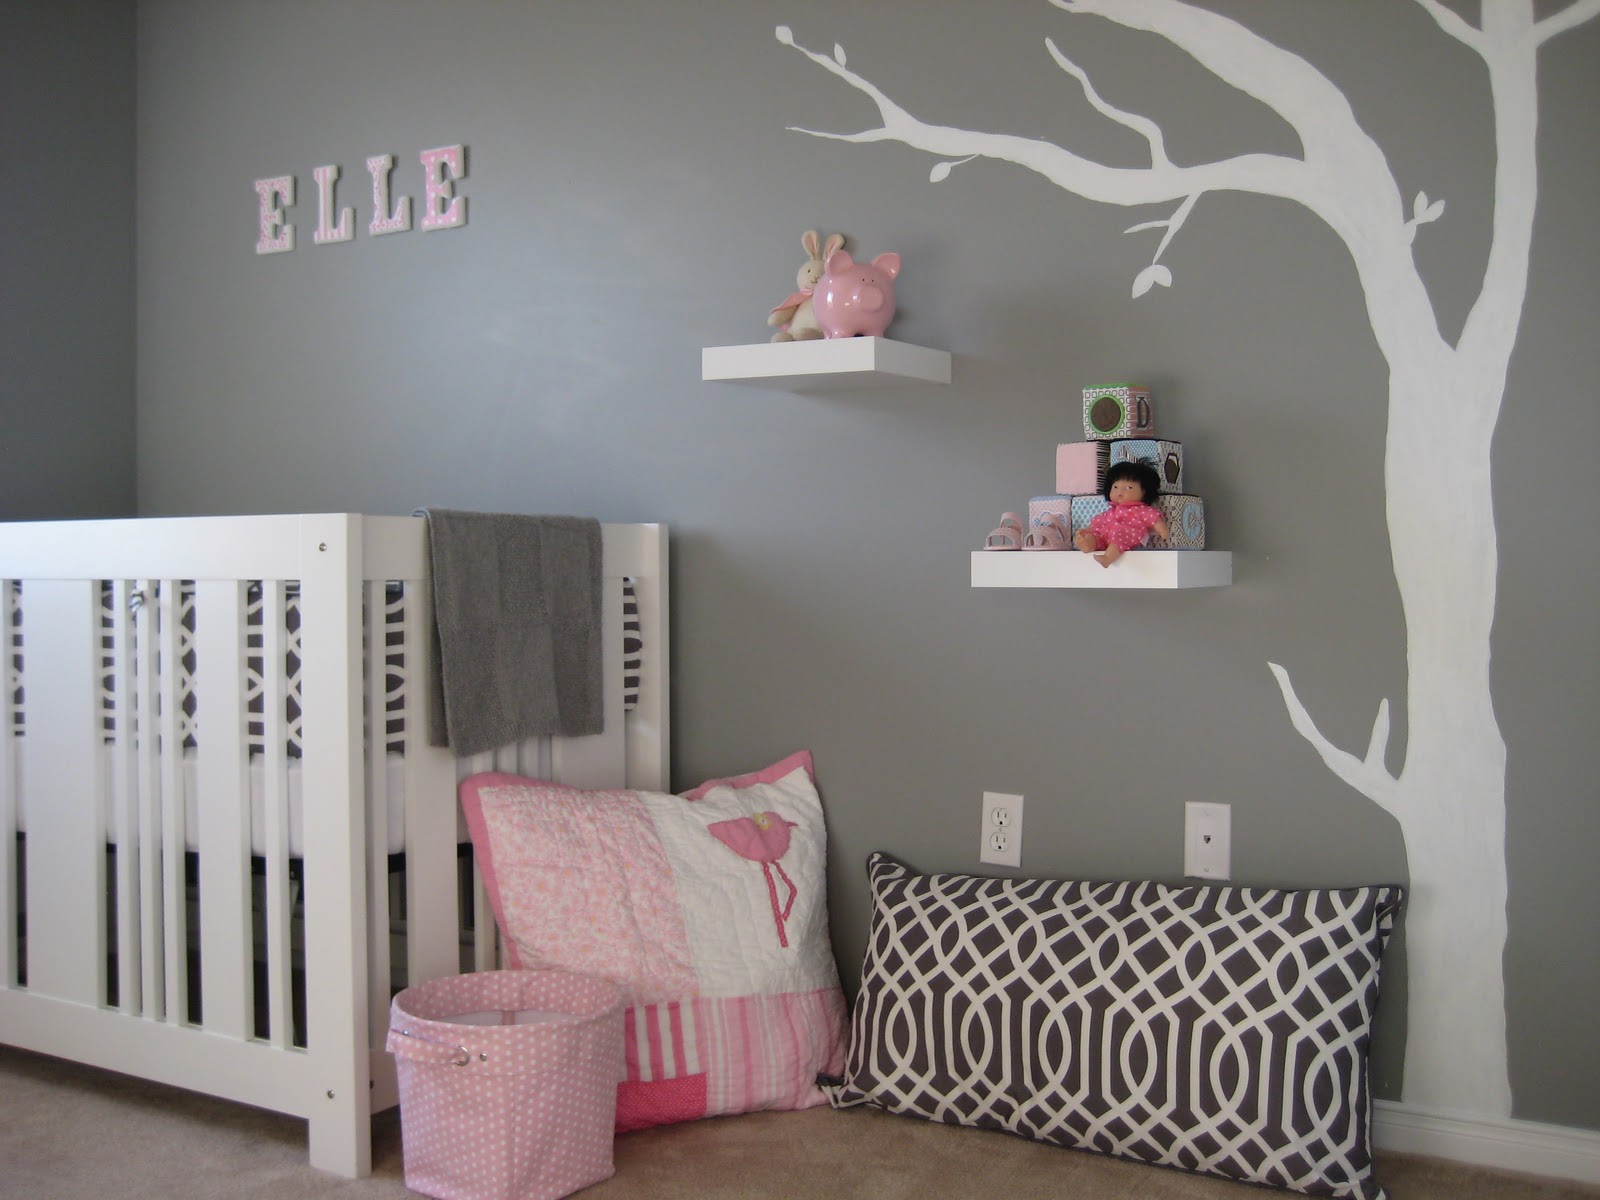 Ikea bathroom light, pink and gray baby girl nursery ideas Best 364 Pink and grey rooms images on Pinterest | Kids Designing A Babys Room ? Consider the Following Points Pink And Grey Room Bedroom Tour Decor Bang On Style Living Pink grey white baby girls